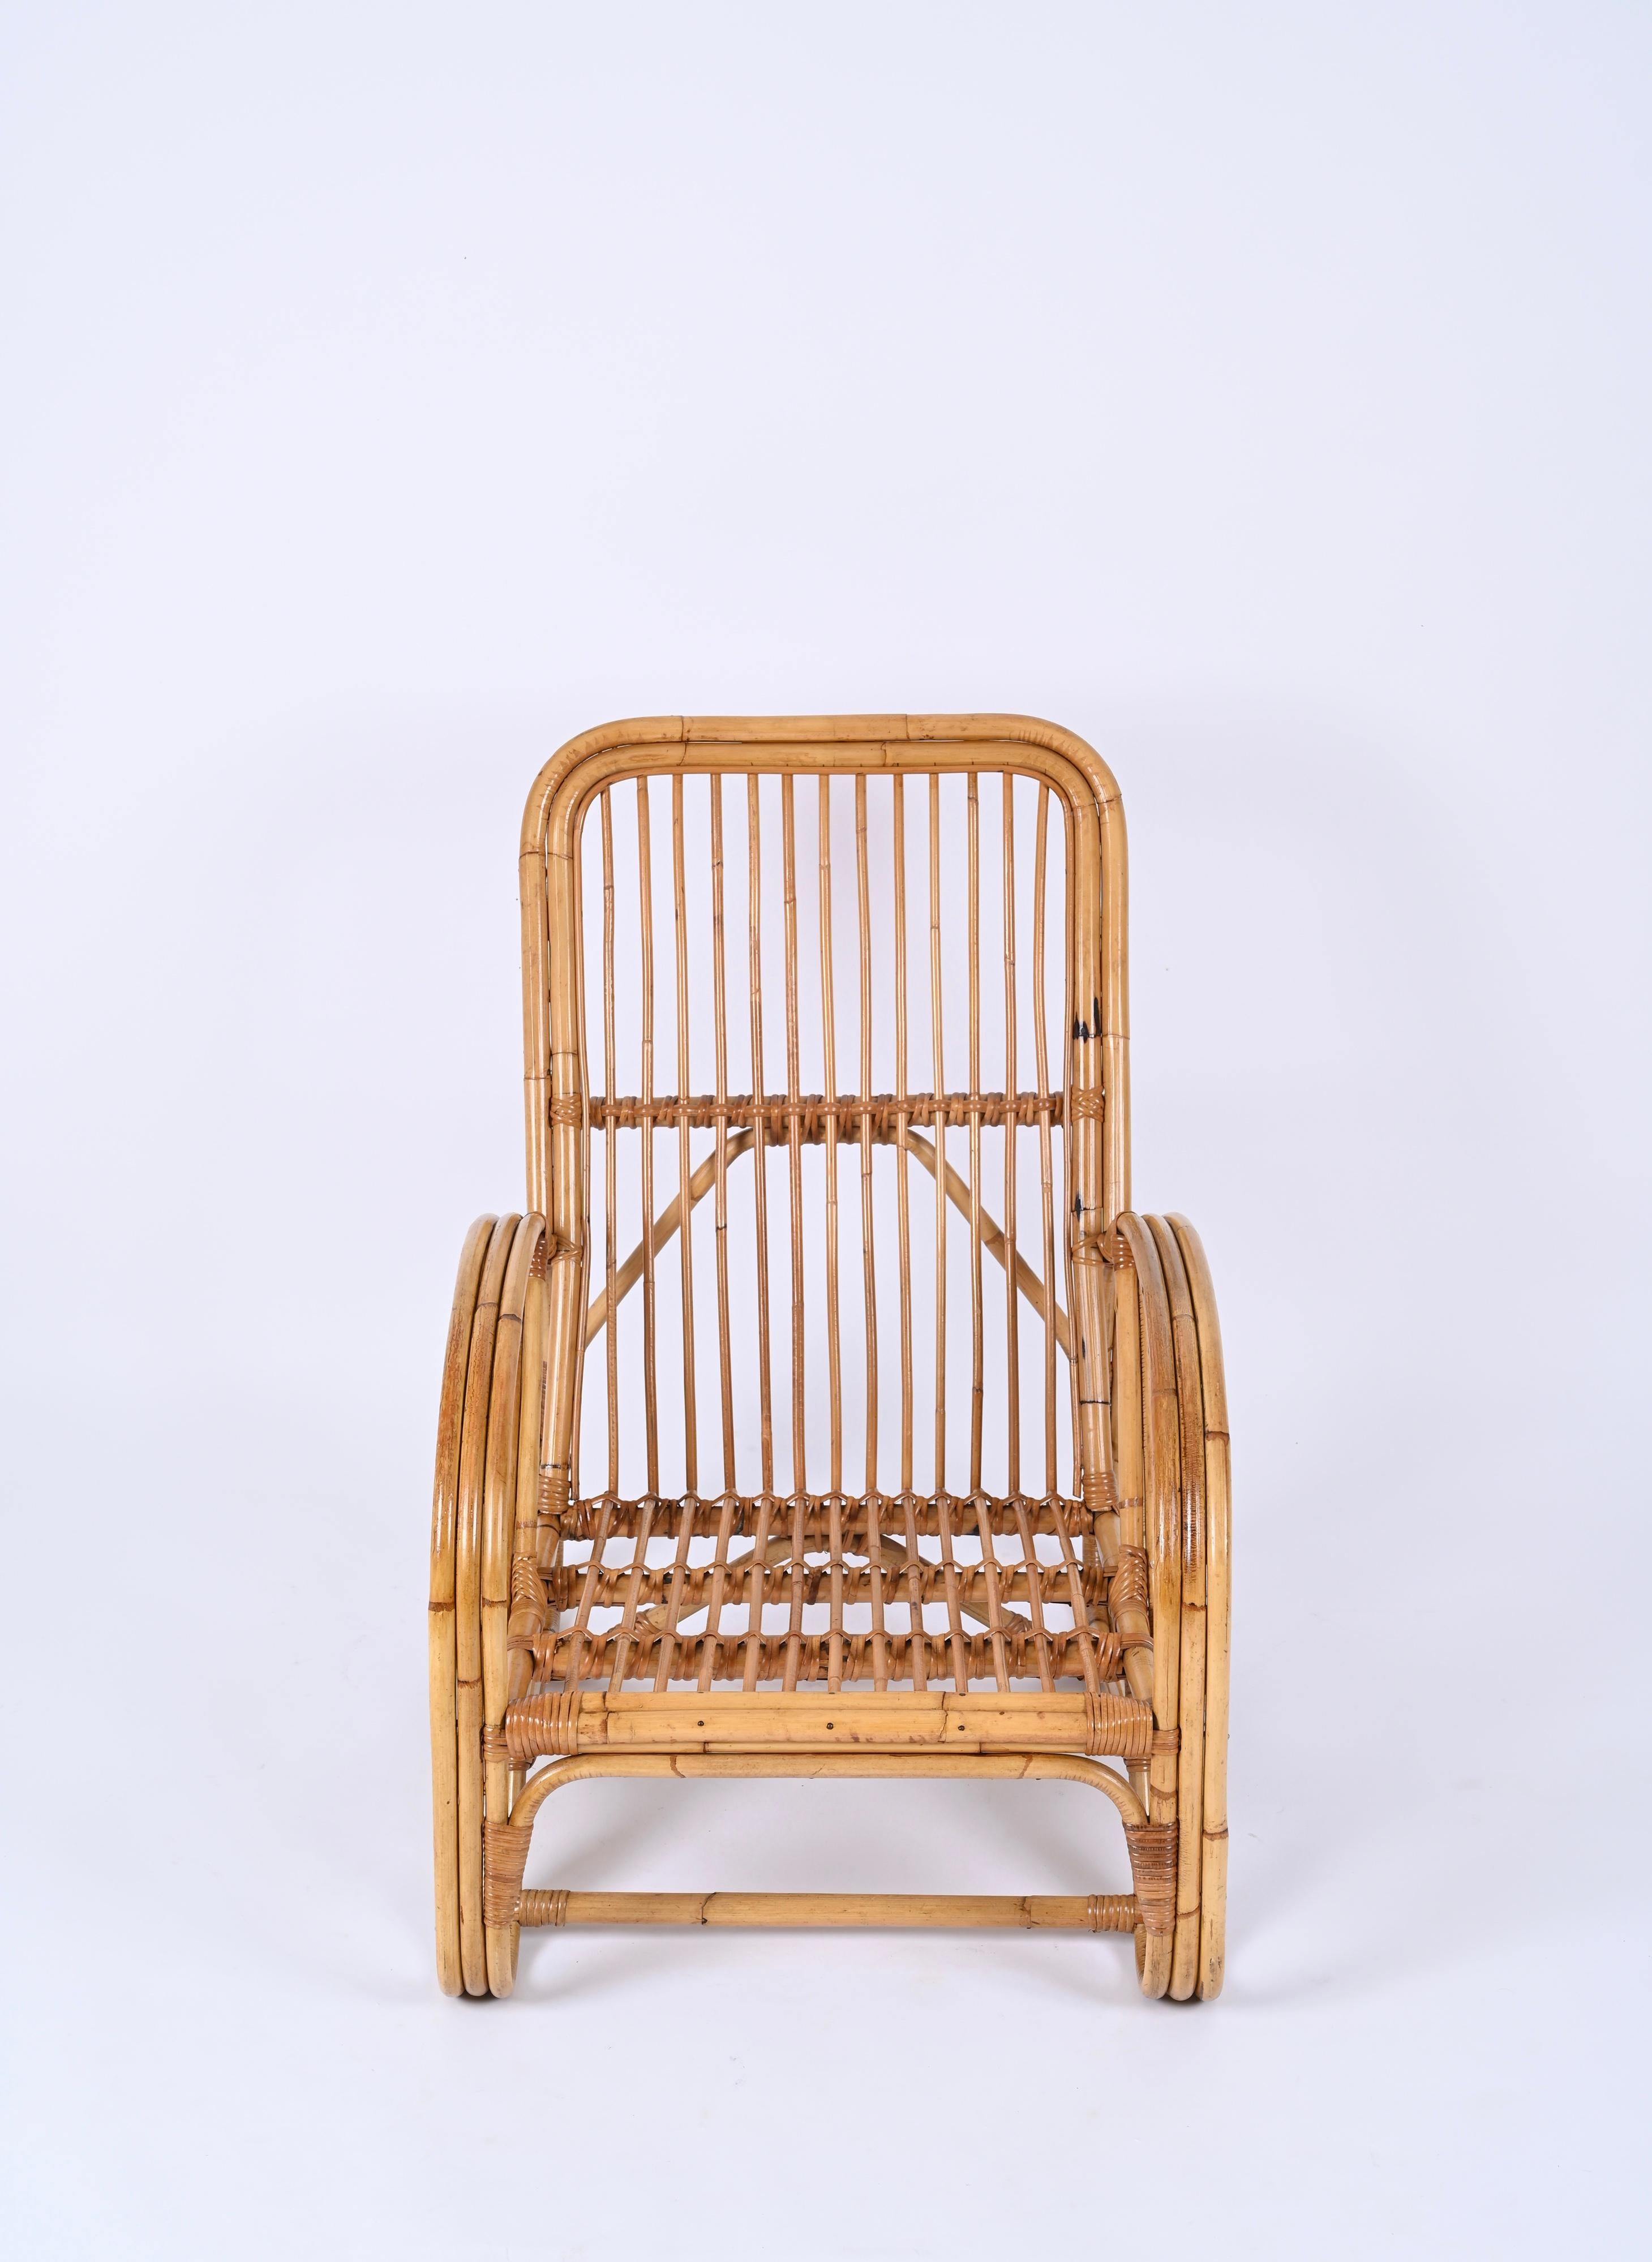 Vivai del Sud Mid-Century Italian Bamboo and Rattan Armchair, Italy 1970s For Sale 9